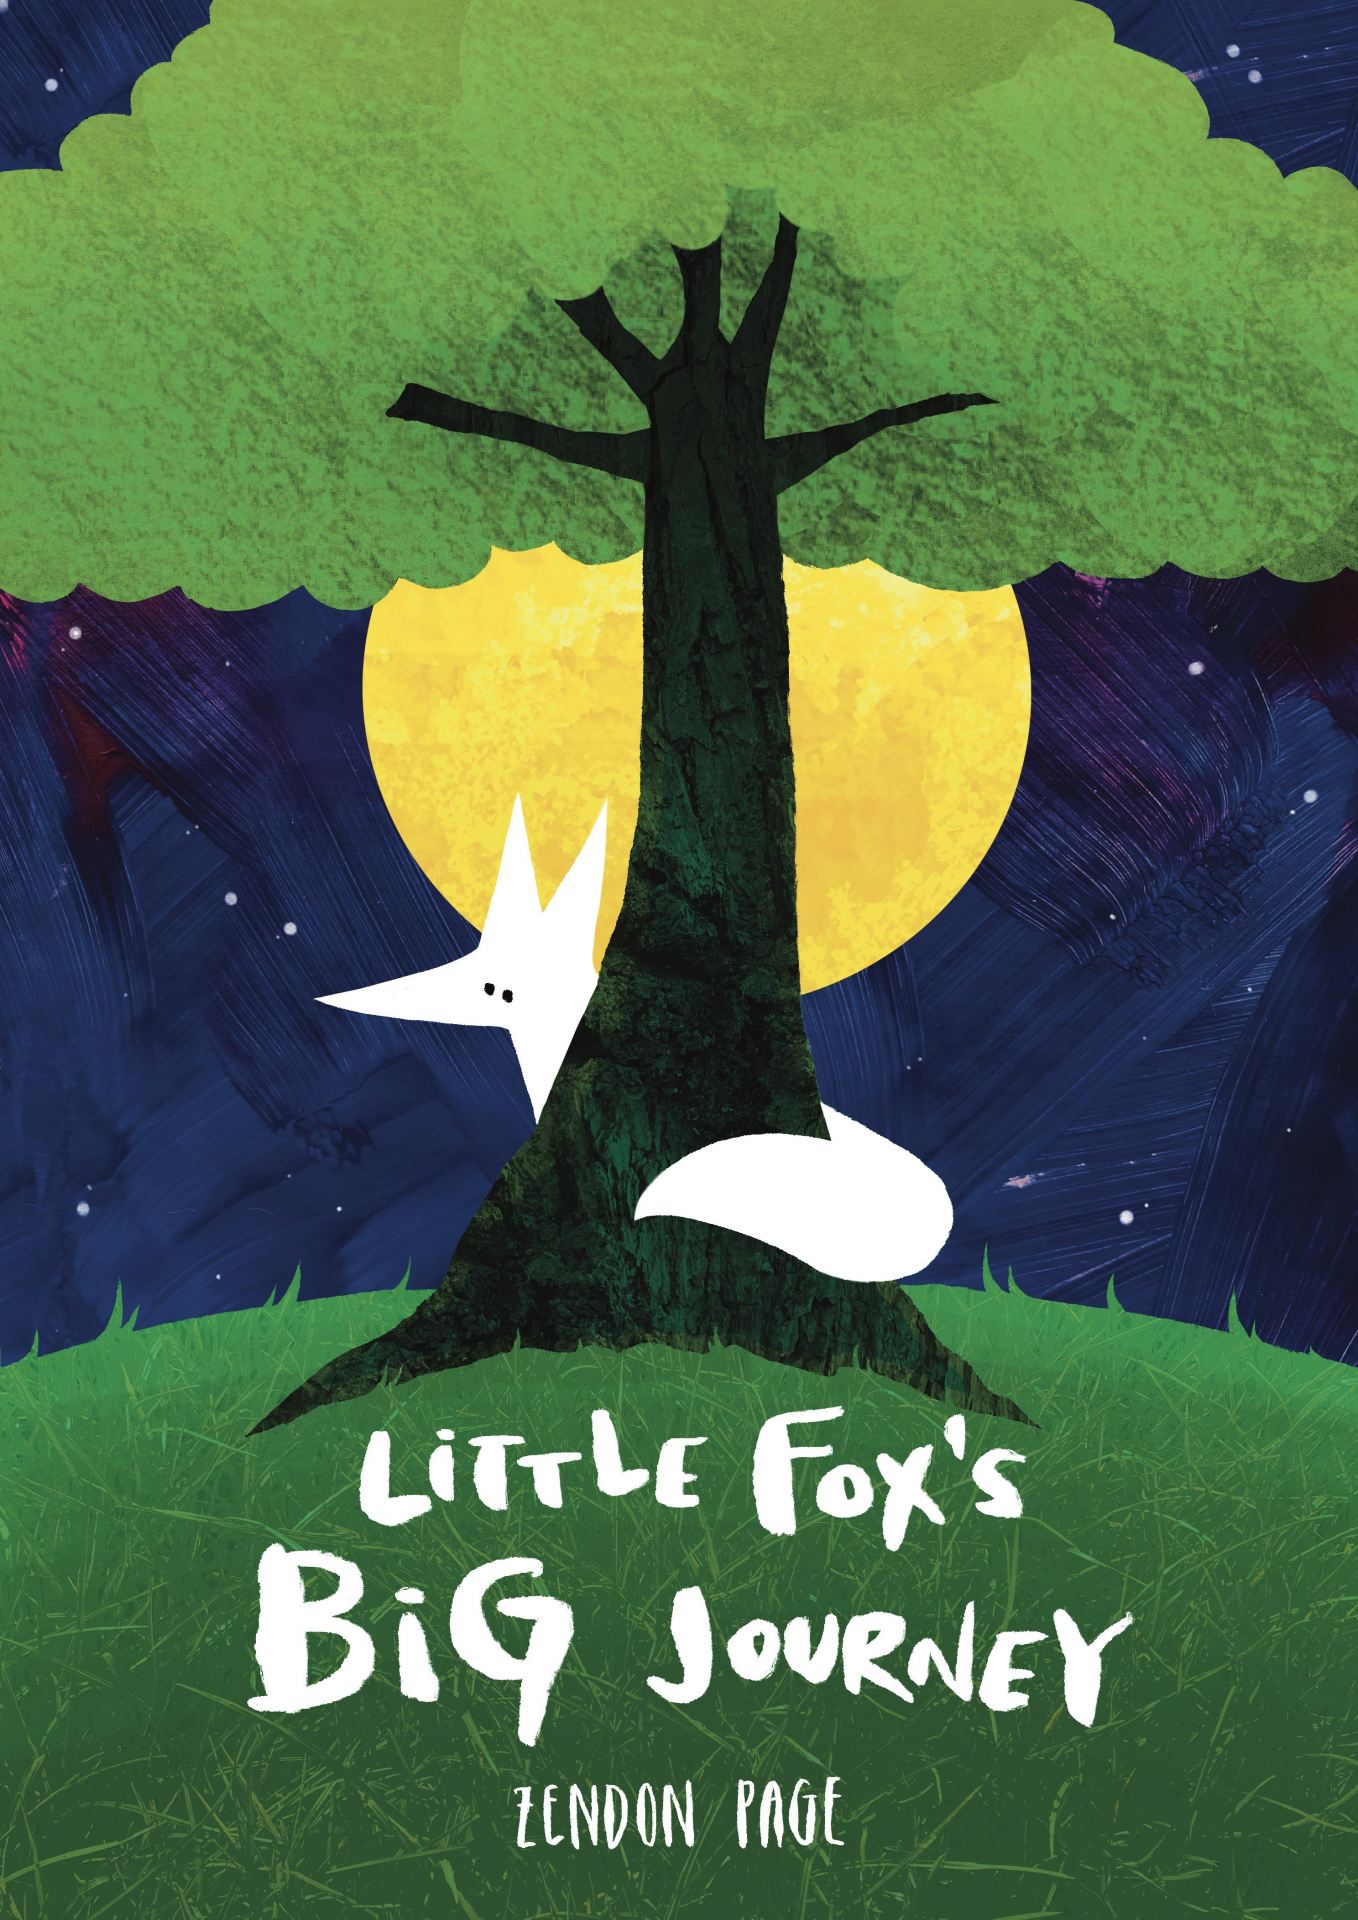 Front cover of a book titled 'Little Fox's Big Journey'. A white fox is peeking out from behind a tree at night with a full moon behind him. All the colours have hand-painted textures.